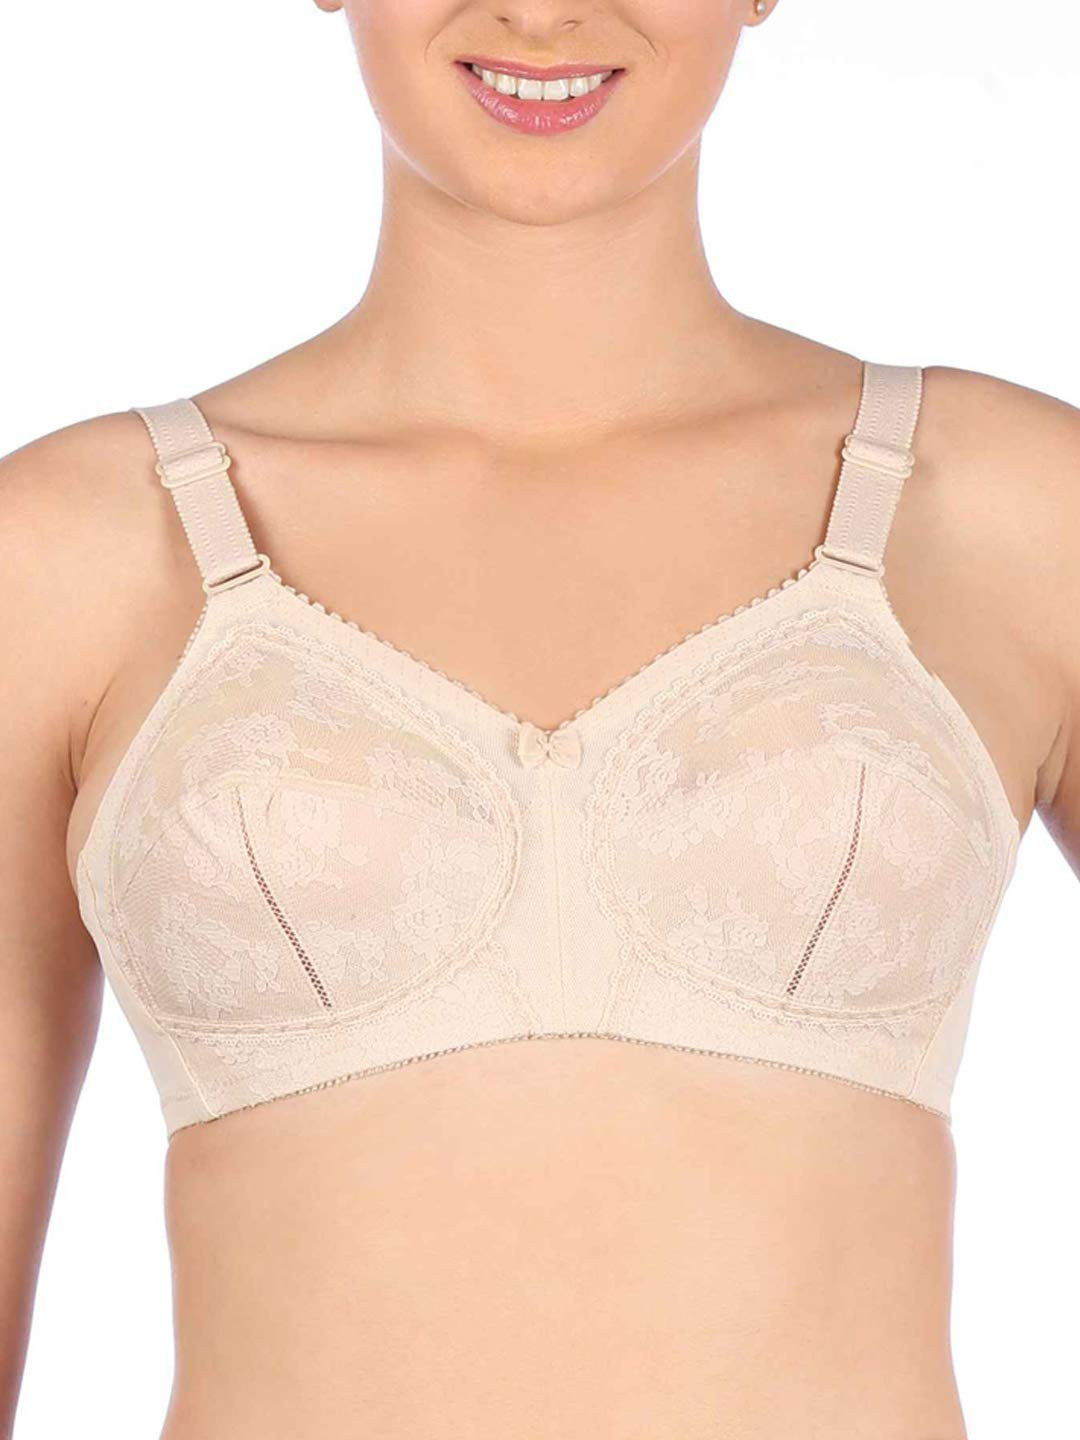 Triumph International Women's Synthetic Wire Free Full Cup